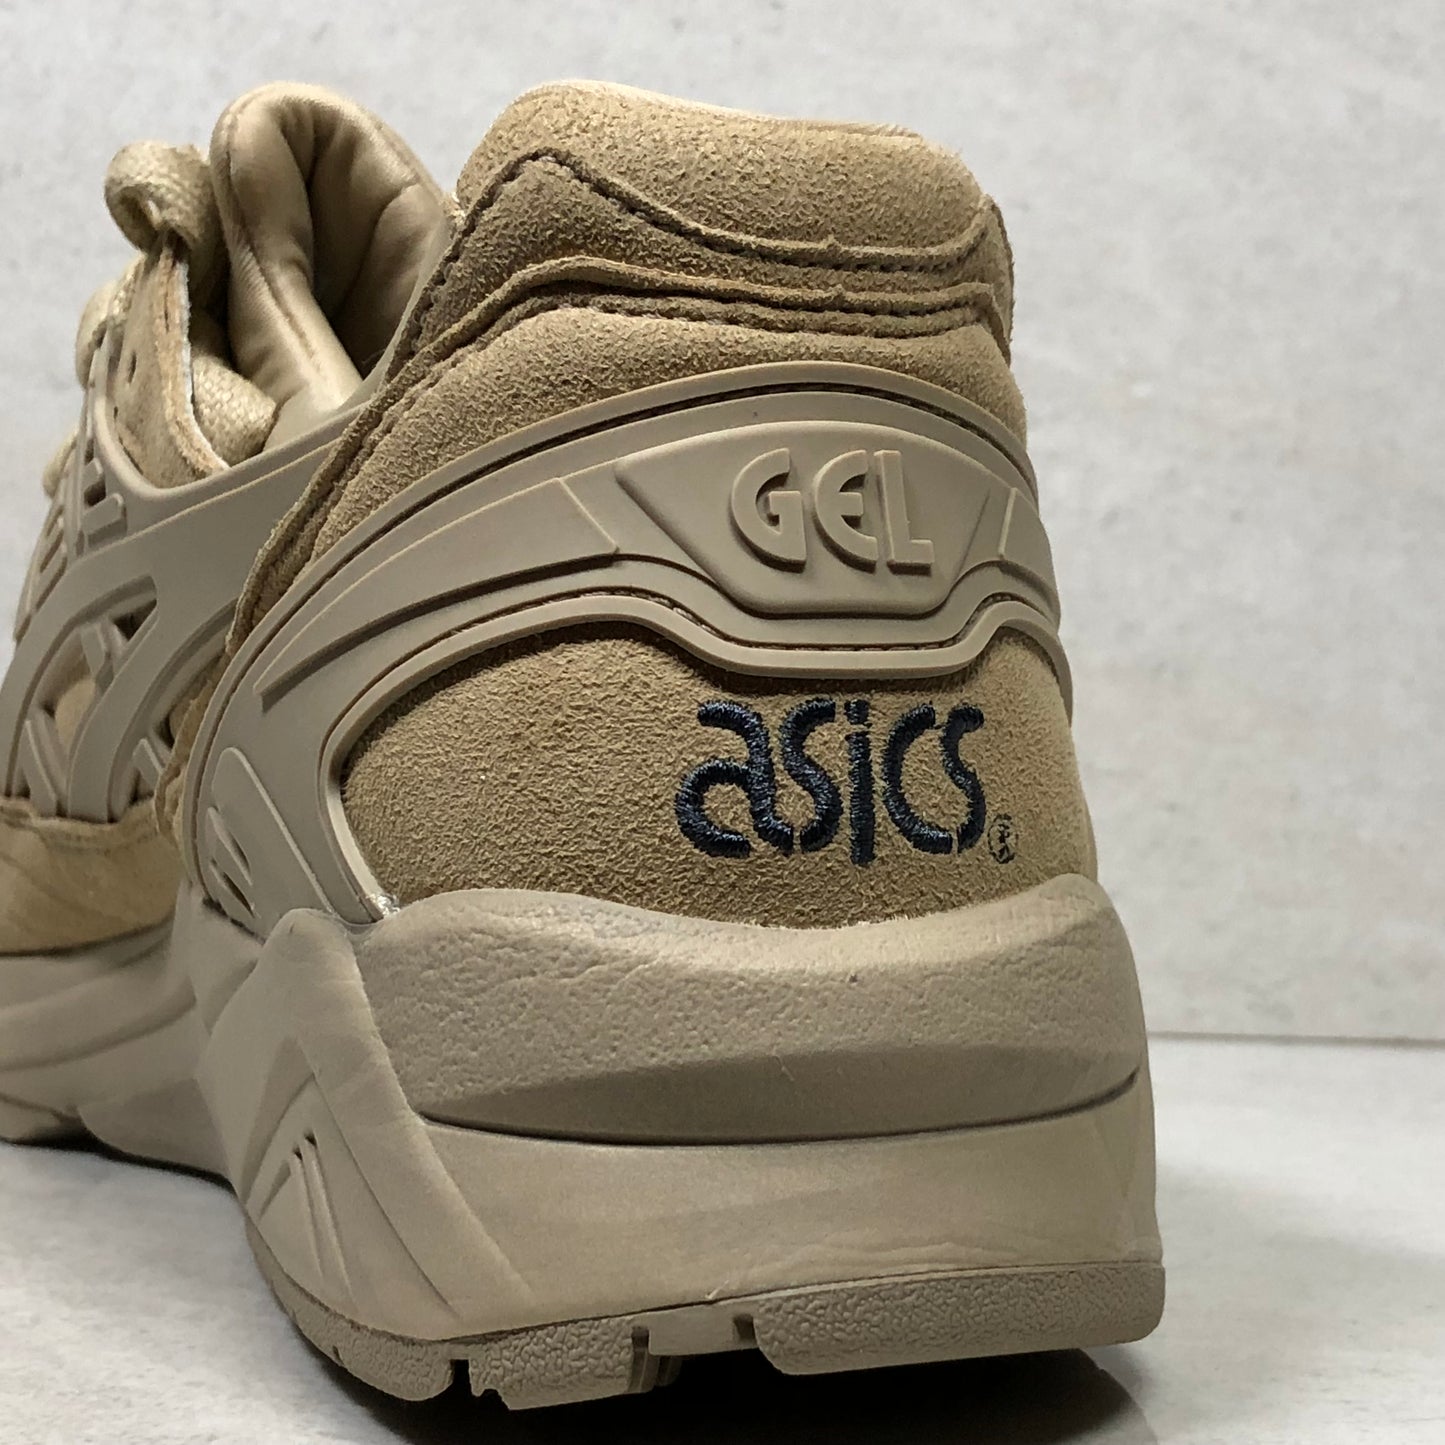 DS ASICS Kayano Trainer Sable Taille 9/Taille 12 tan H72QJ 0505